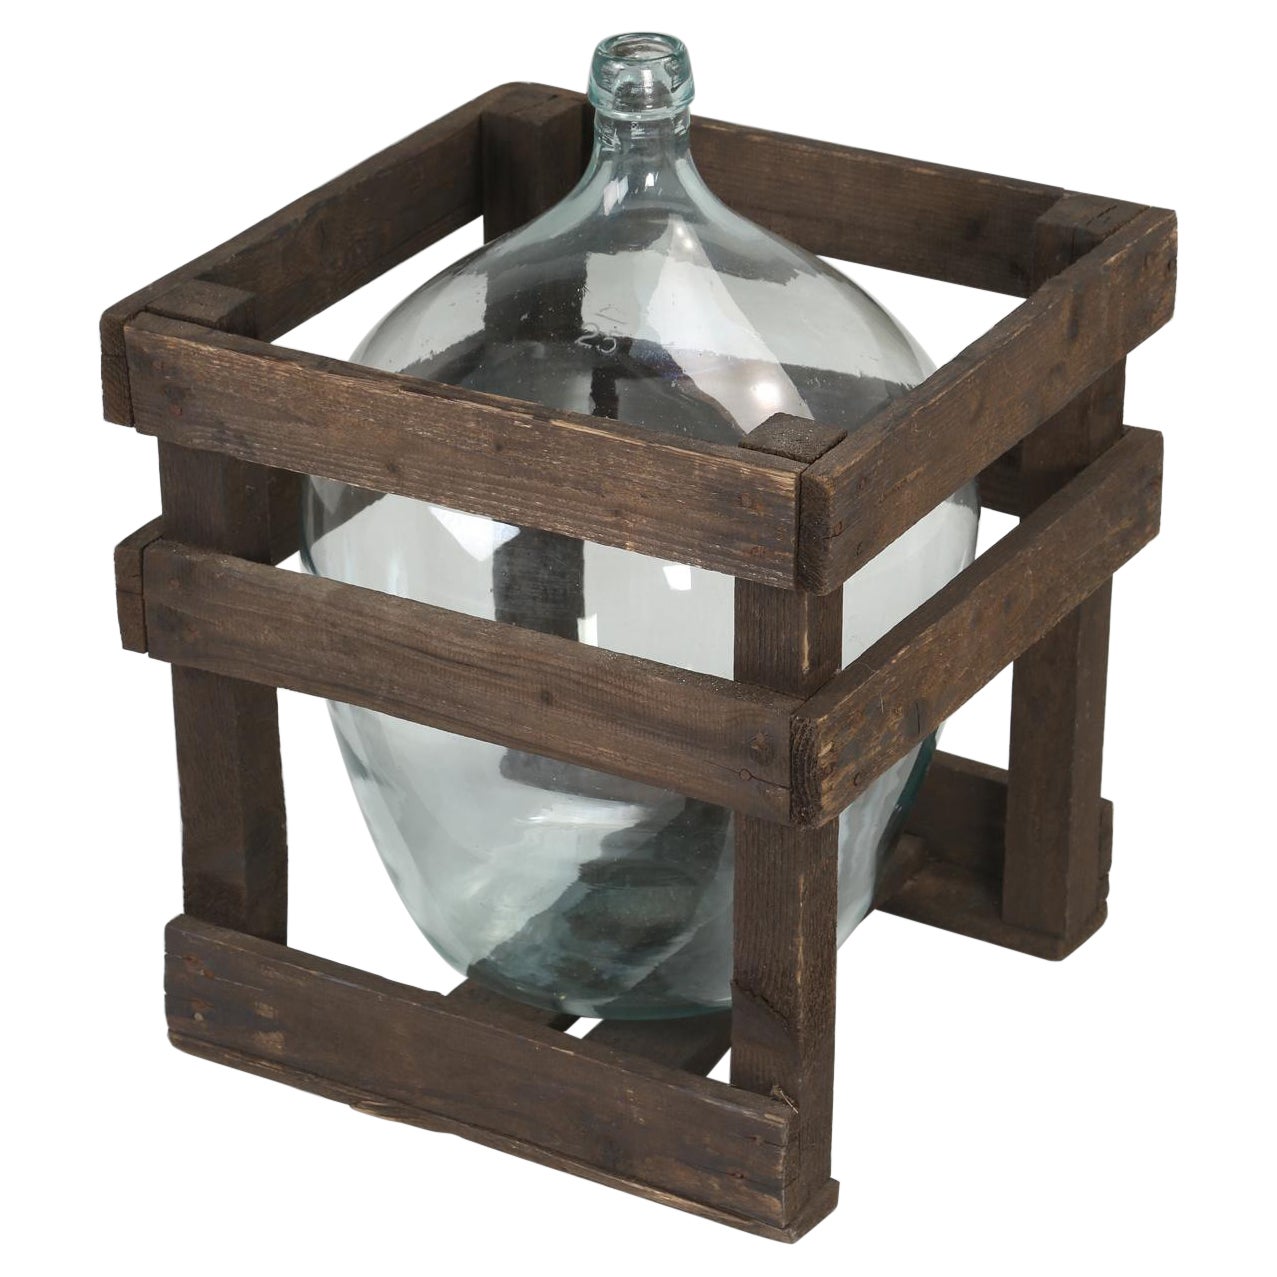 Demijohn or Carboy Glass Vessel in the Original Wooden Carrying Crate